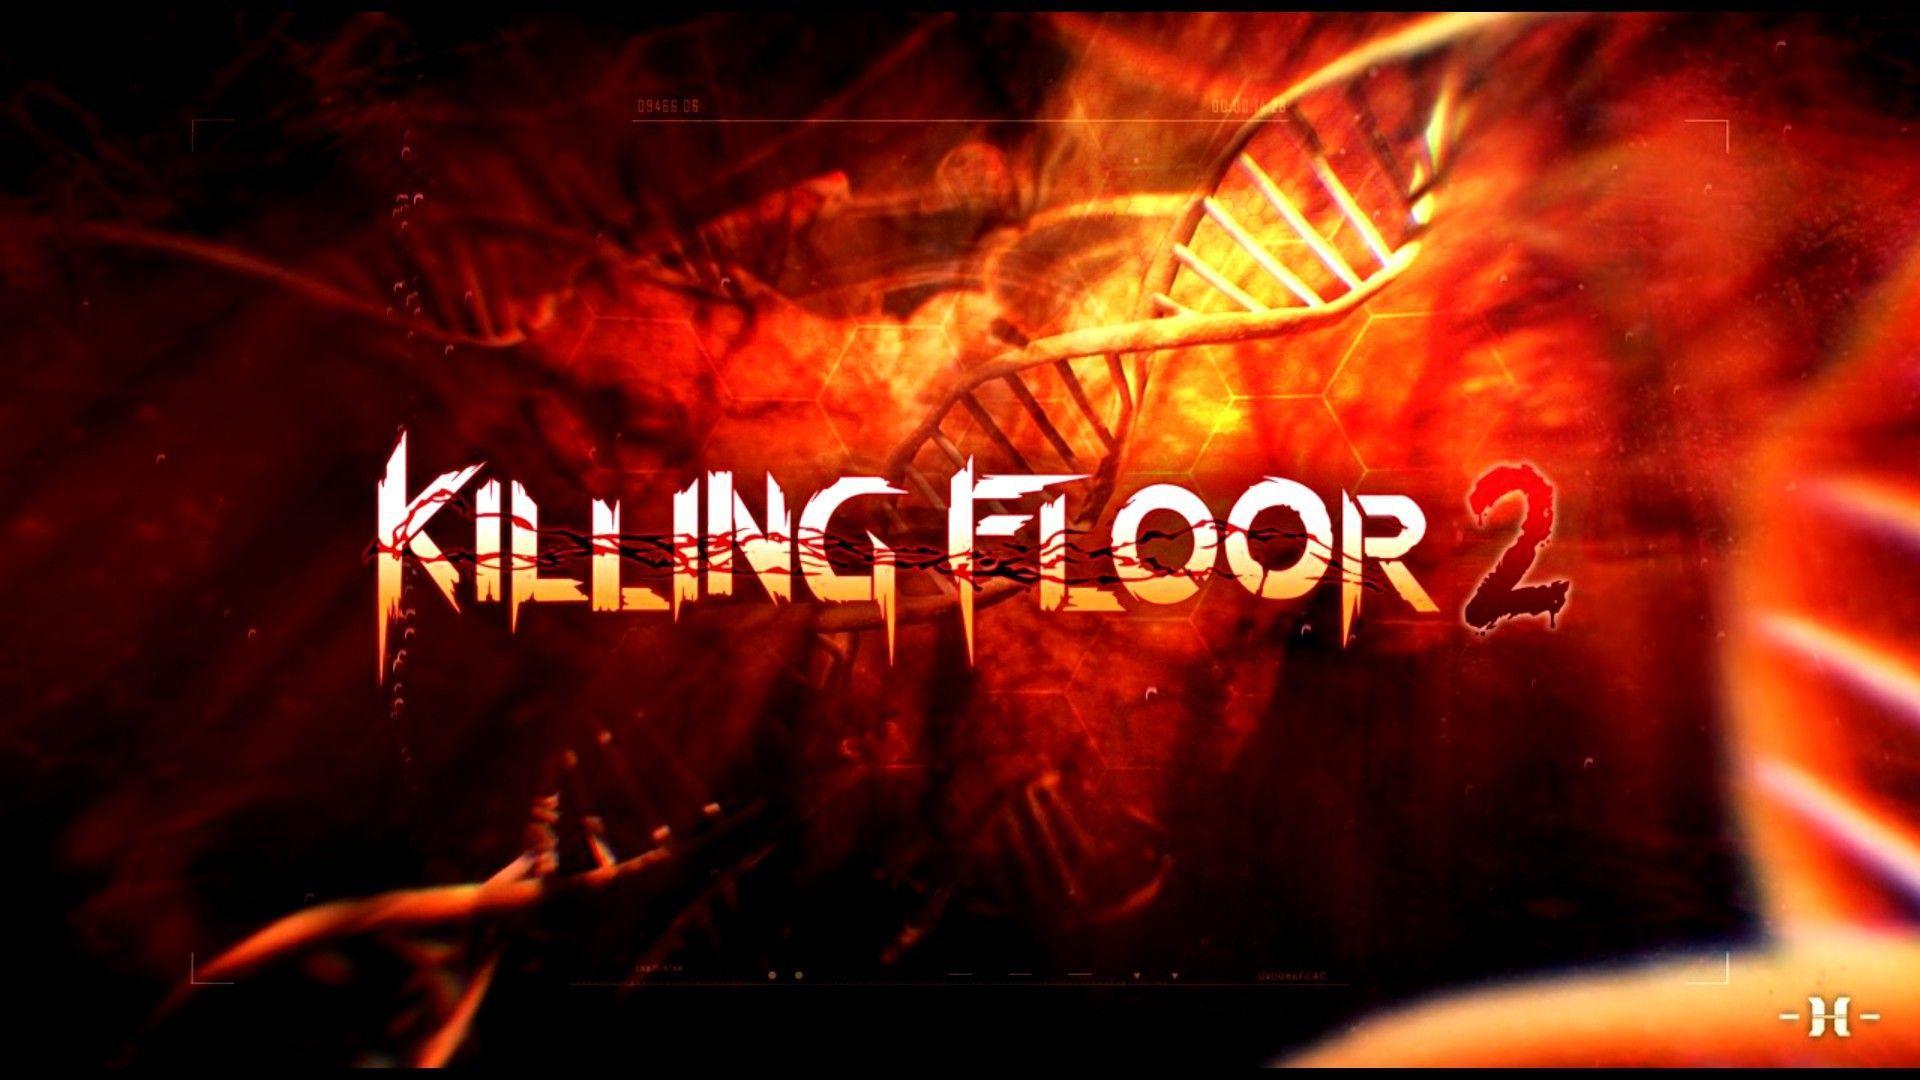 Killing Floor 2 Wallpaper Image Photo Picture Background